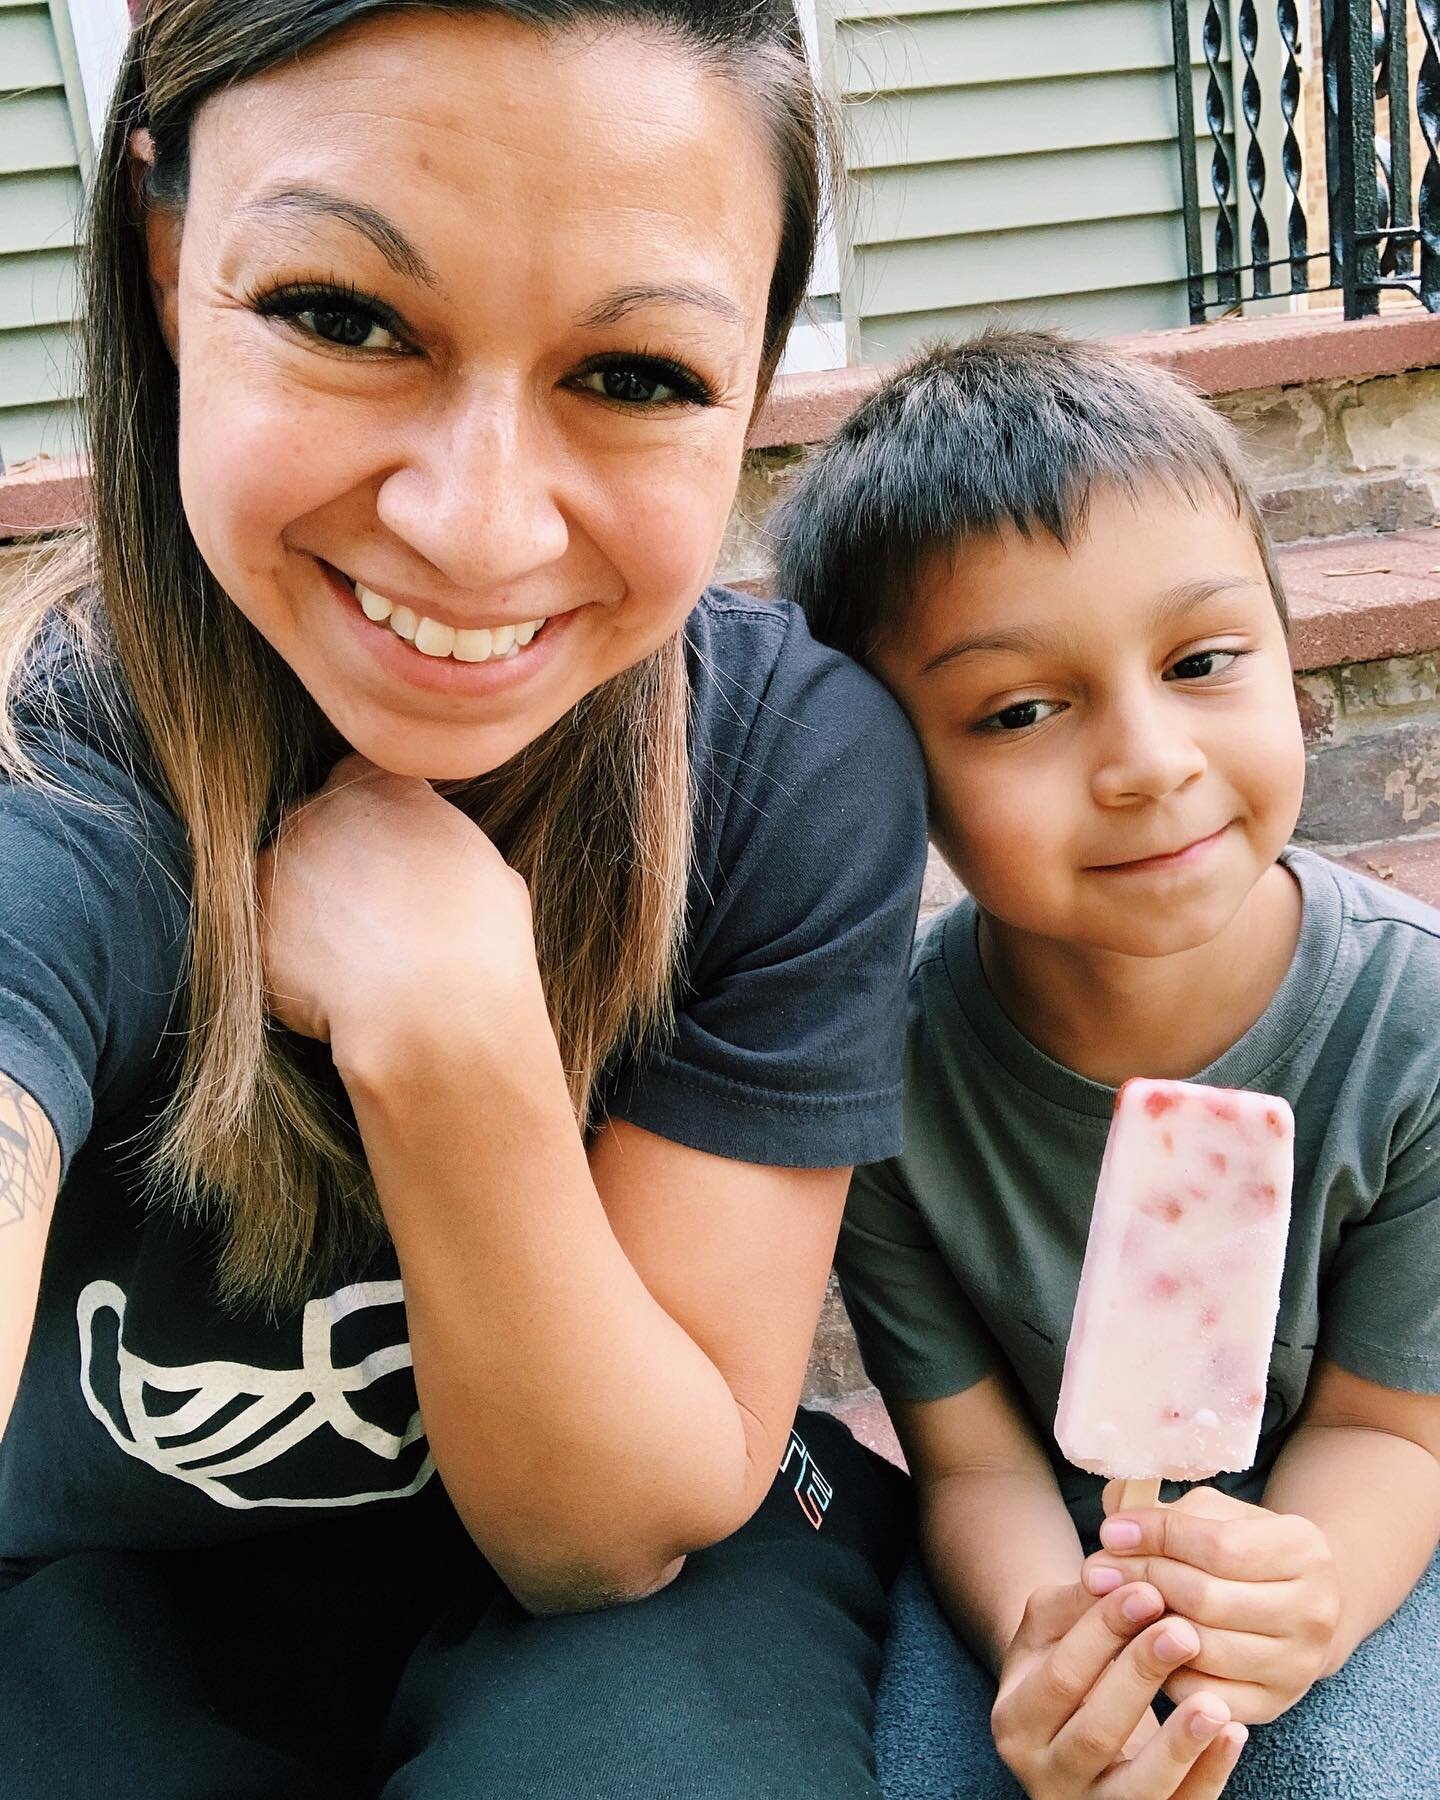 The best days include paletas. 
E: &ldquo;Today has been a pretty good day for me.&rdquo; 🥰